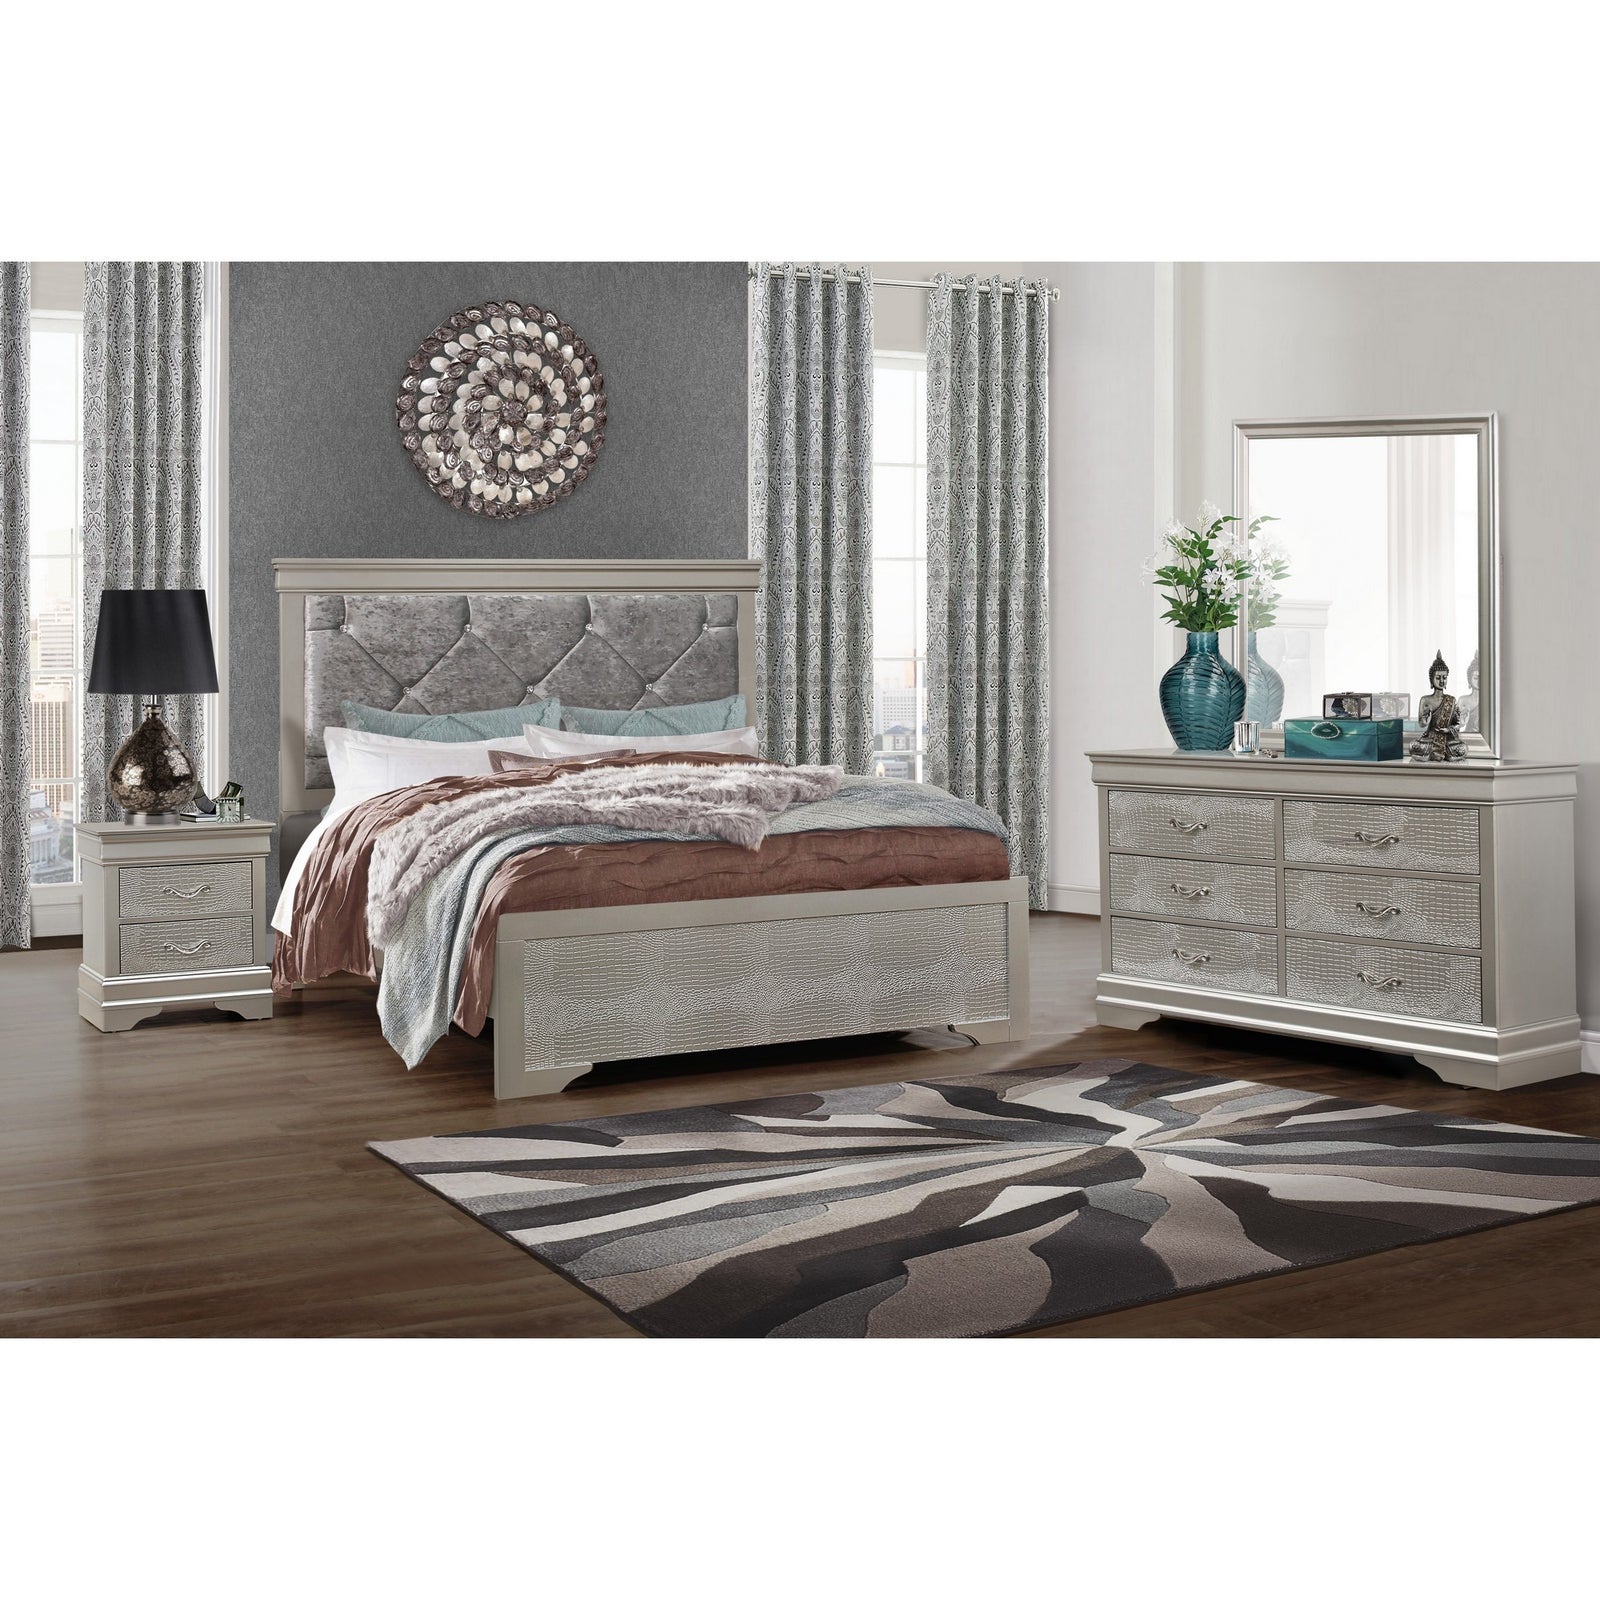 Silver Tone Rubberwood King Bed With Clean Line Headboard And Footboard